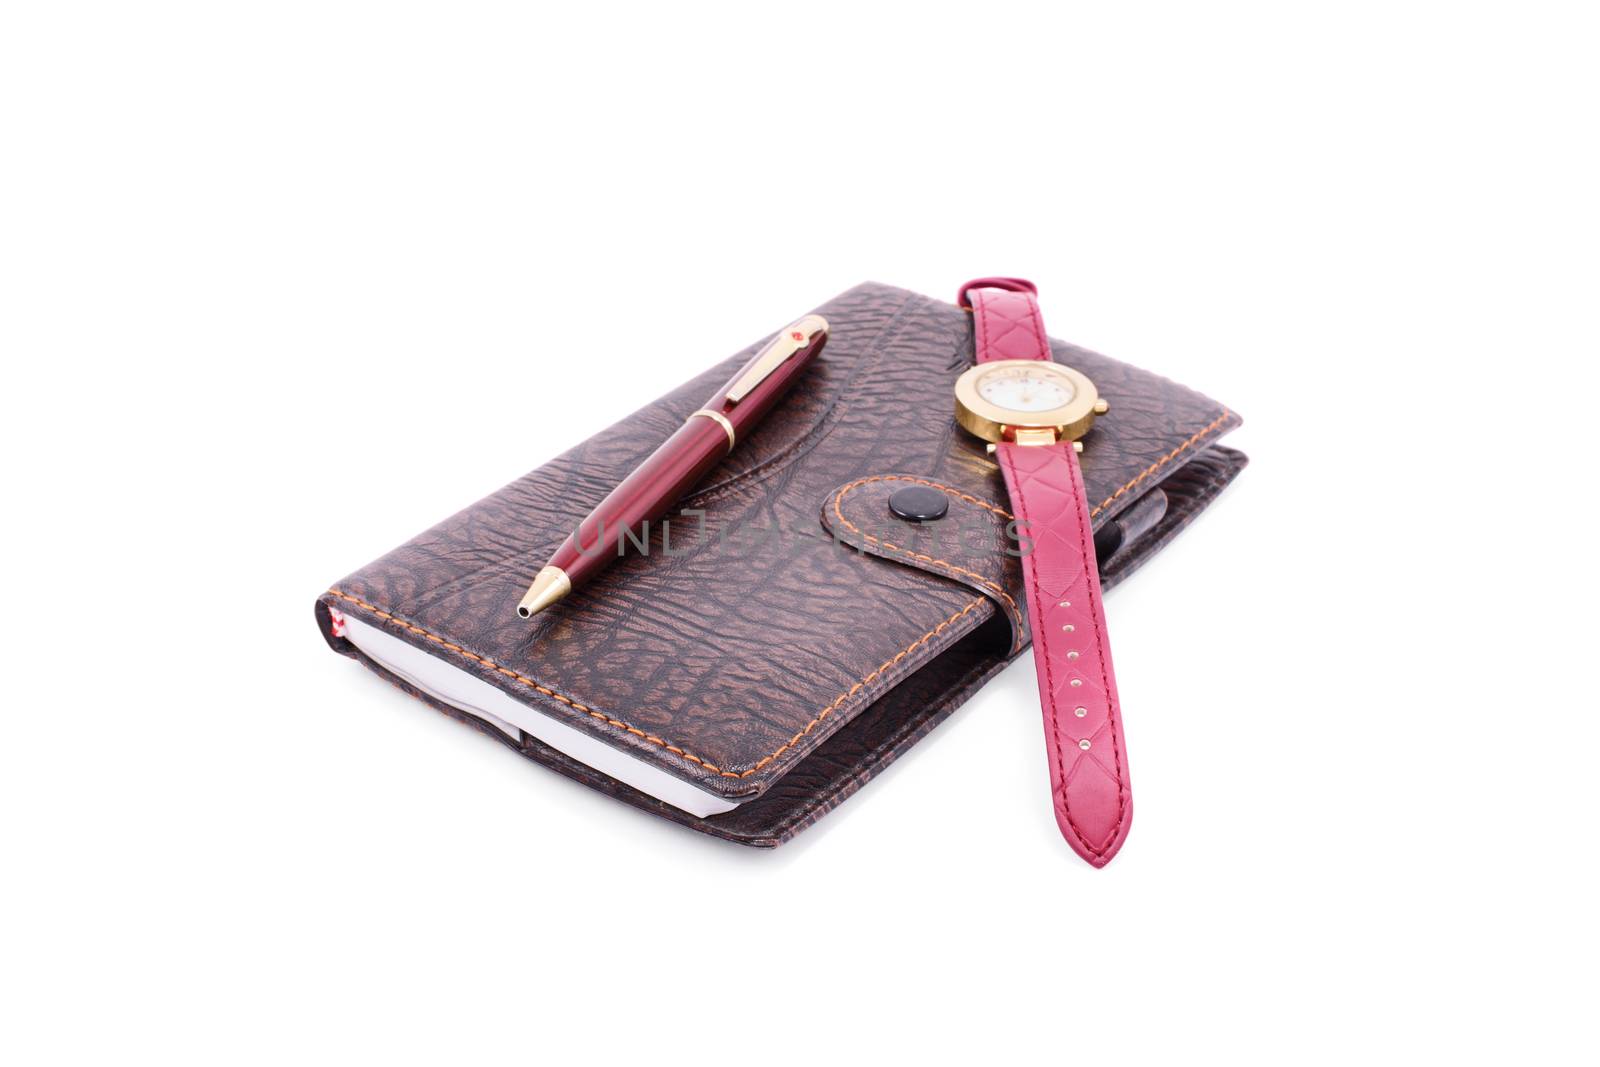 Close up of a planner notebook with a pen and wrist watch, isolated on white background.